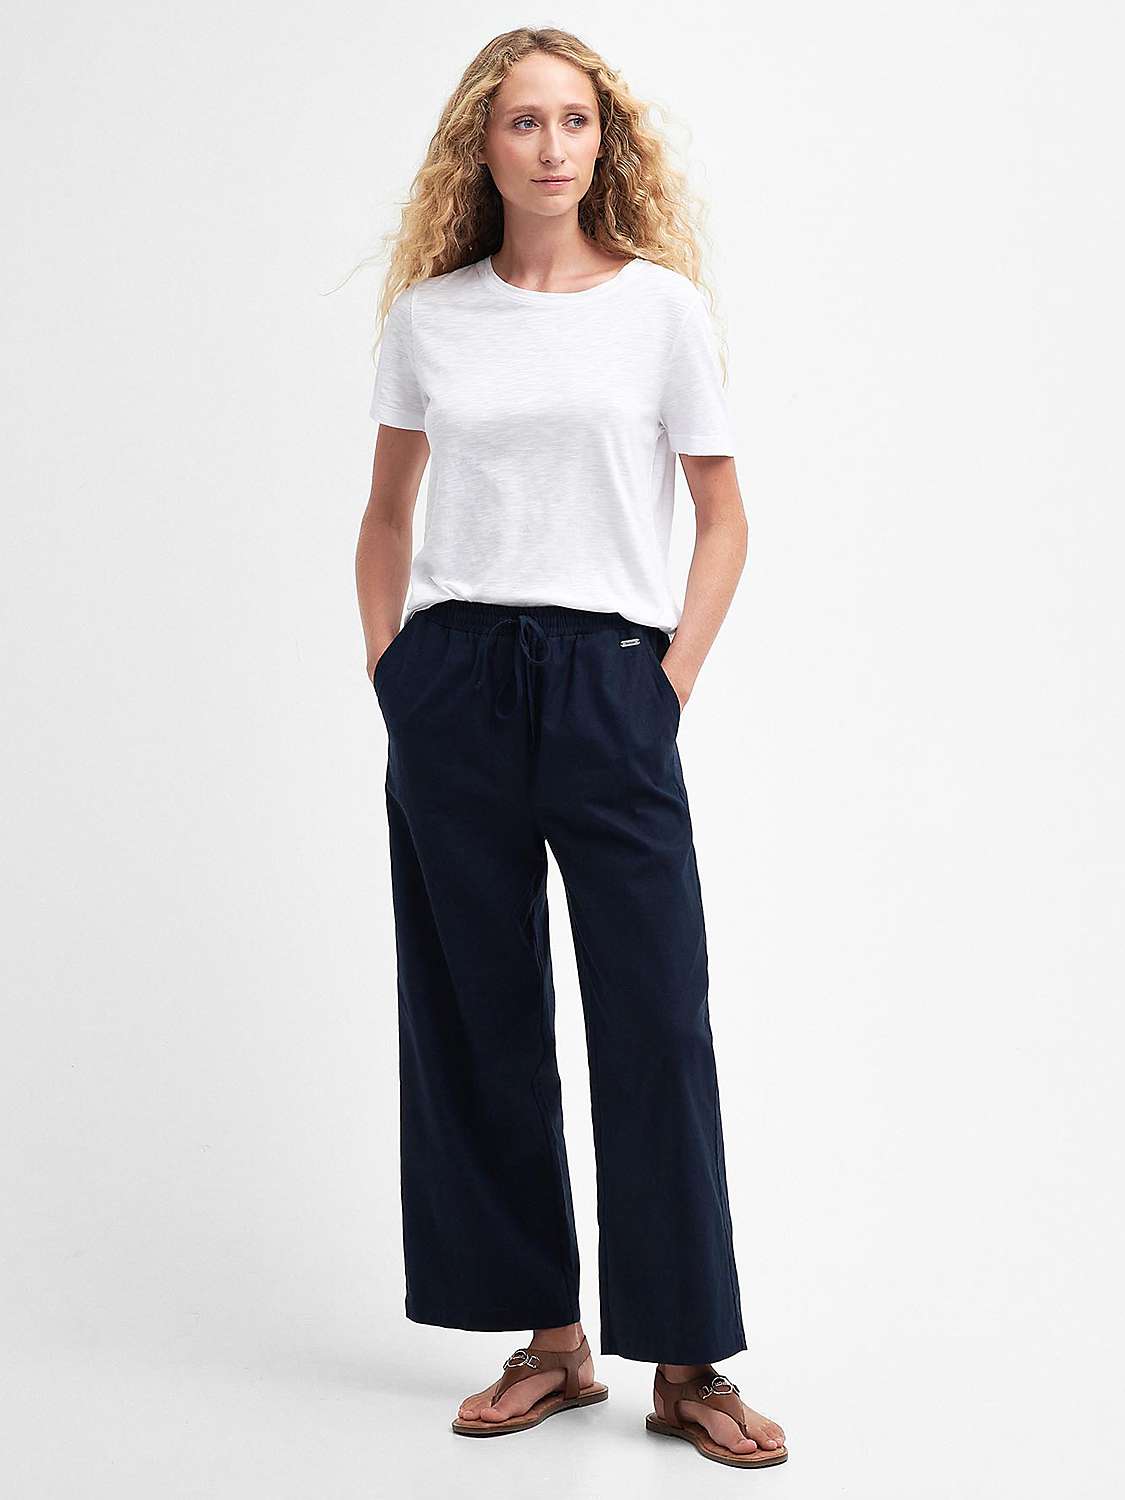 Buy Barbour Christie Trousers, Navy Online at johnlewis.com